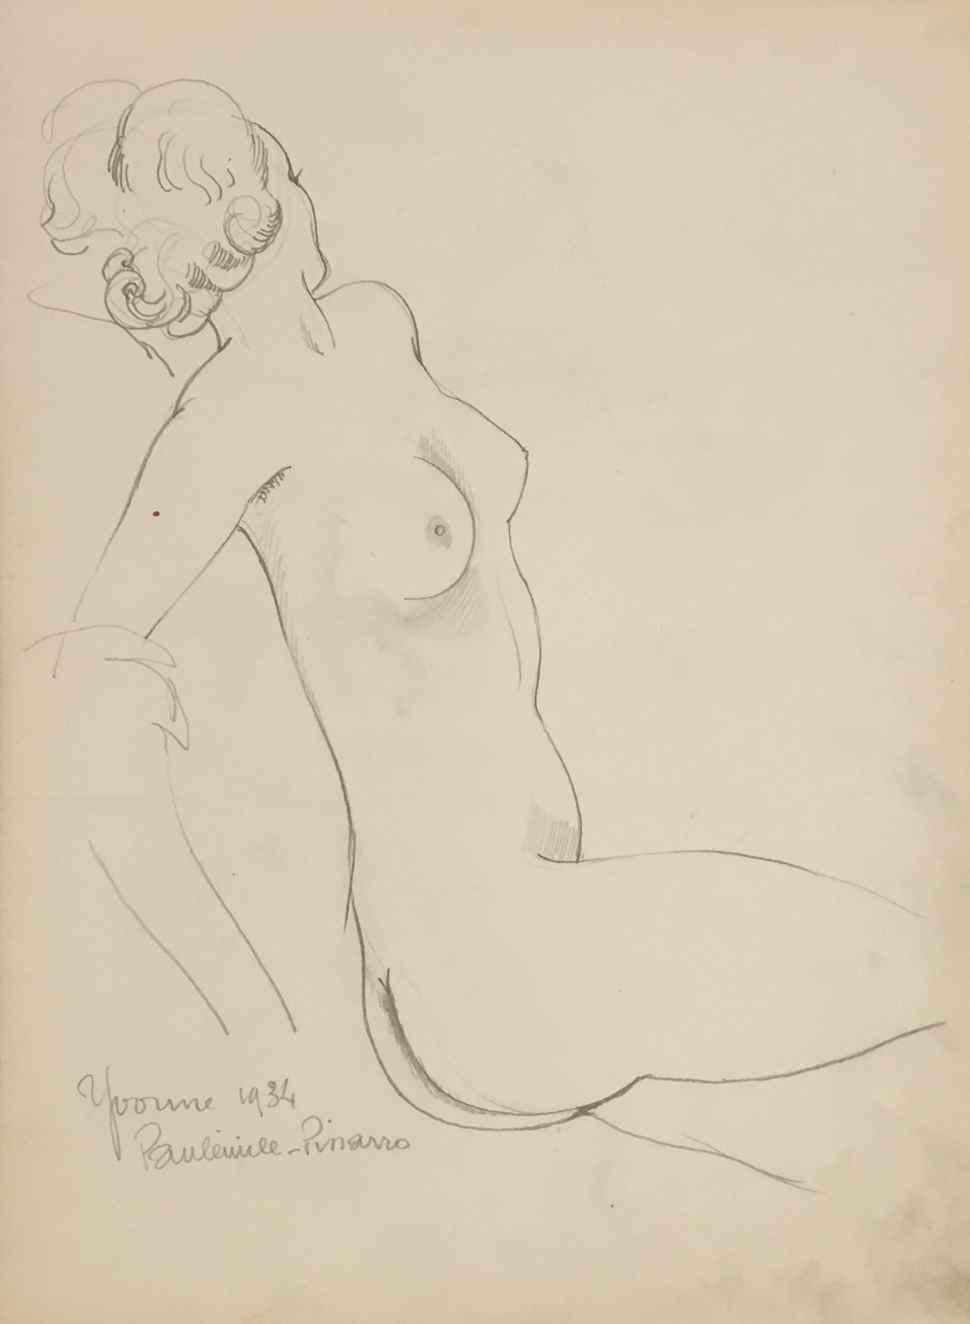 *UK BUYERS WILL PAY AN ADDITIONAL 20% VAT ON TOP OF THE ABOVE PRICE

SOLD UNFRAMED

Yvonne Assise by Paulémile Pissarro (1884 - 1972)
Graphite on paper
32 x 23.5 cm (12 ⁵/₈ x 9 ¹/₄ inches)
Signed lower left, Paulémile-Pissarro-, and titled lower